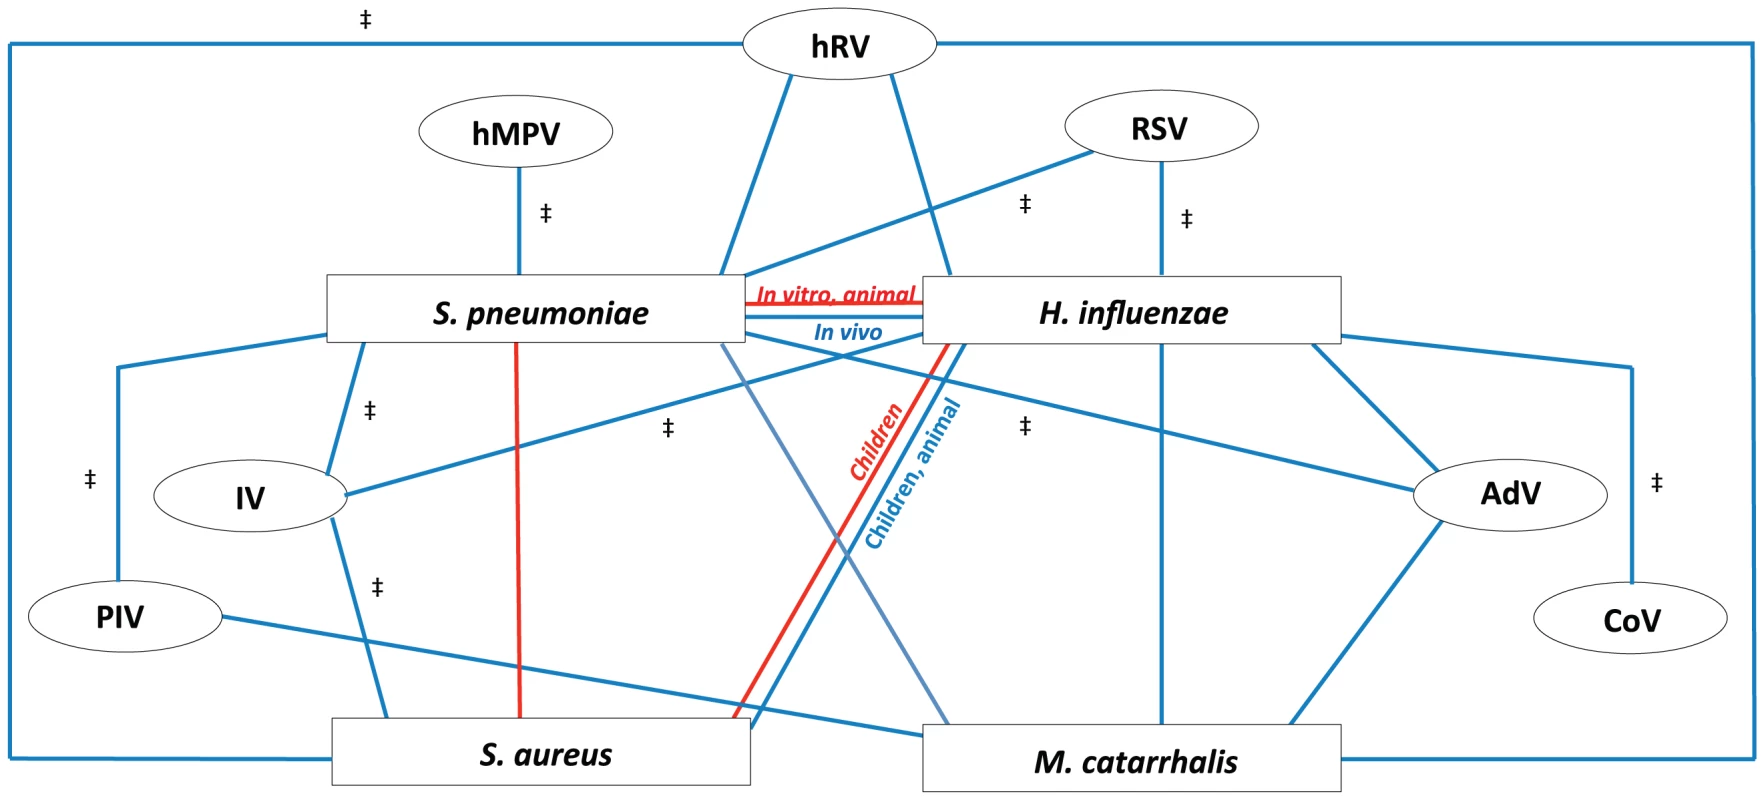 Proposed model of bacterial and viral interactions.